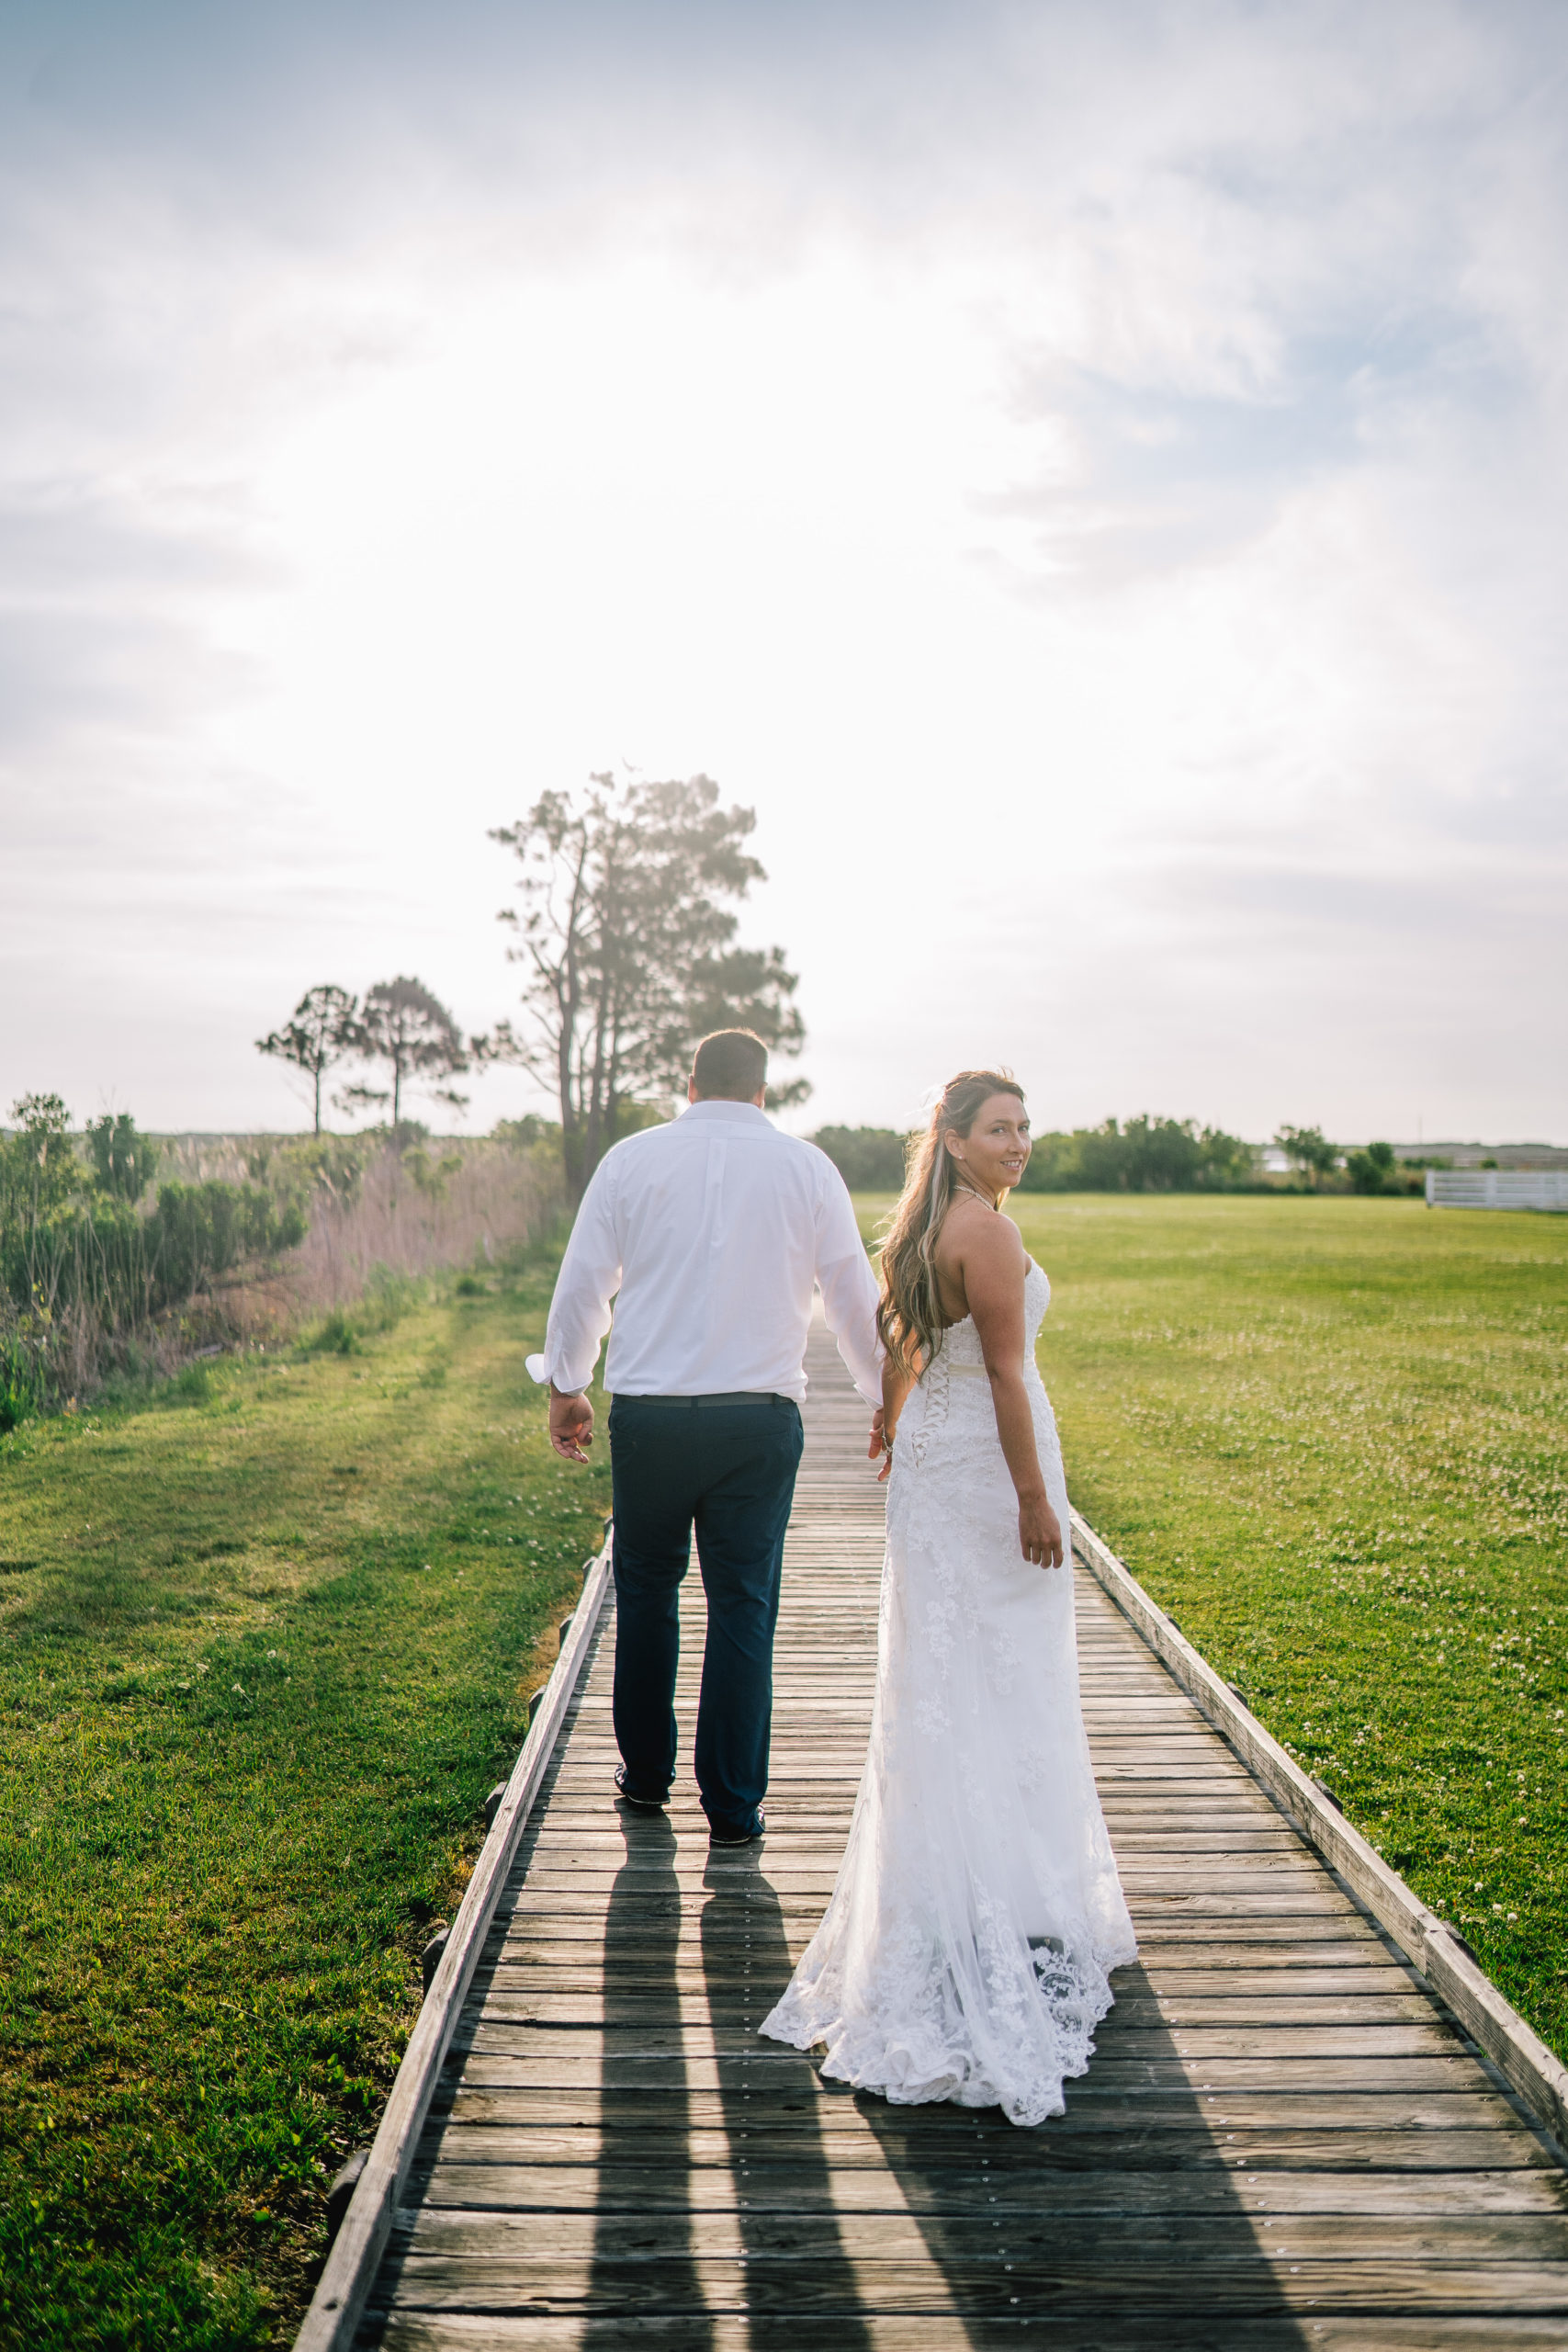 East coast couple walking on a boardwalk at sunrise holding hands as the bride who is wearing a lace dress looks behind her shoulder to the camera.